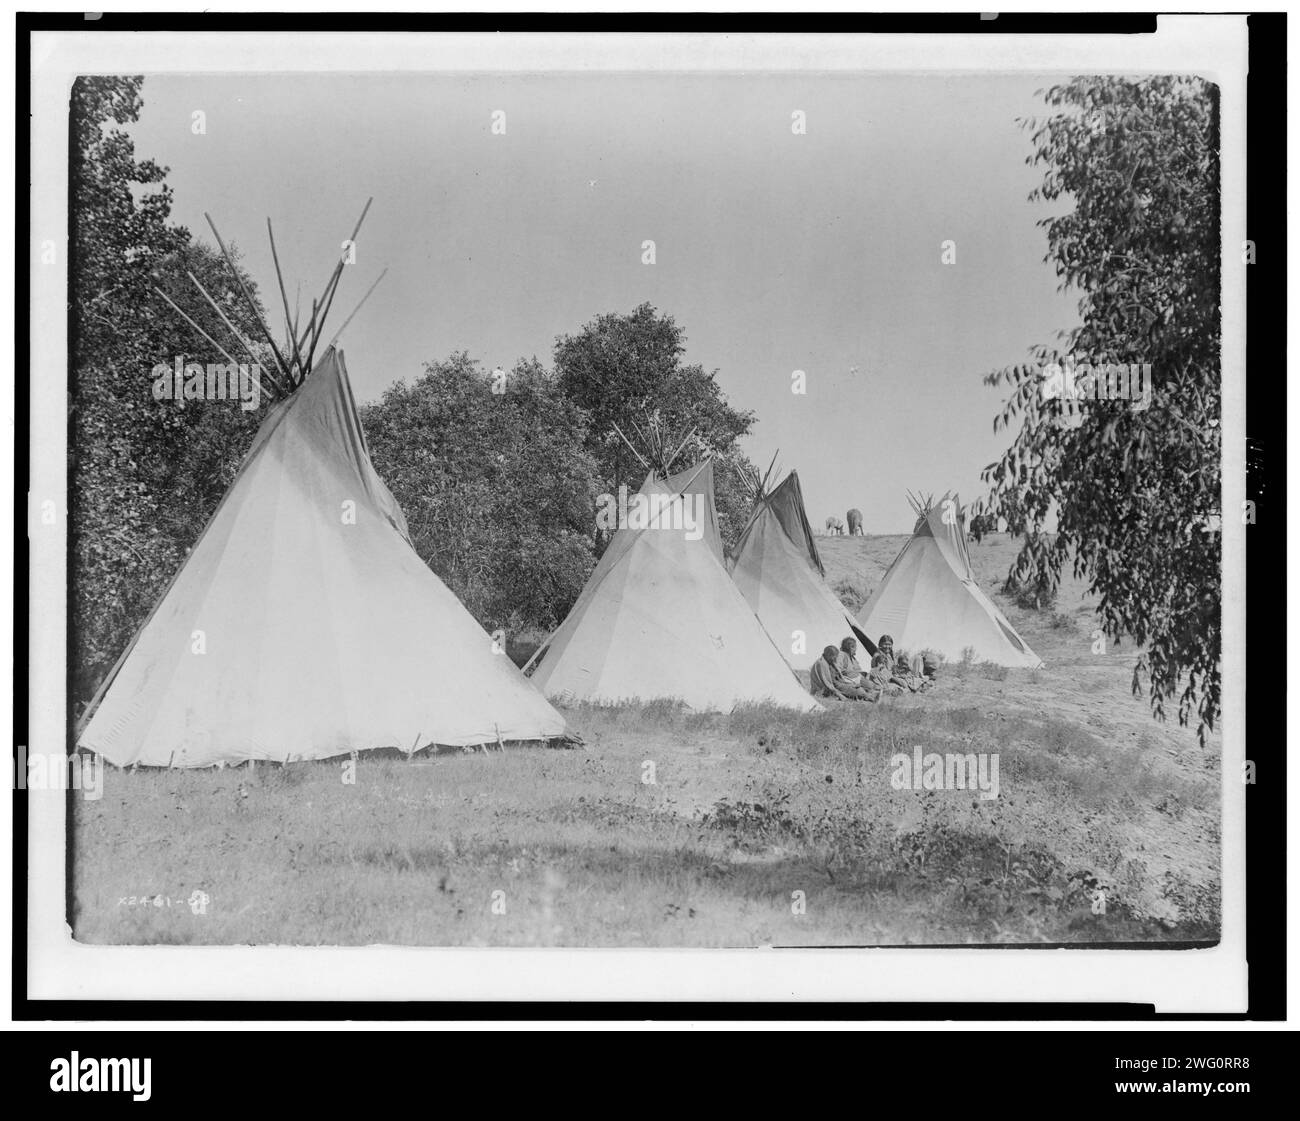 Camp life, c1908. Four canvas covered tipis, Assiniboine women and children seated on ground, South Dakota. Stock Photo